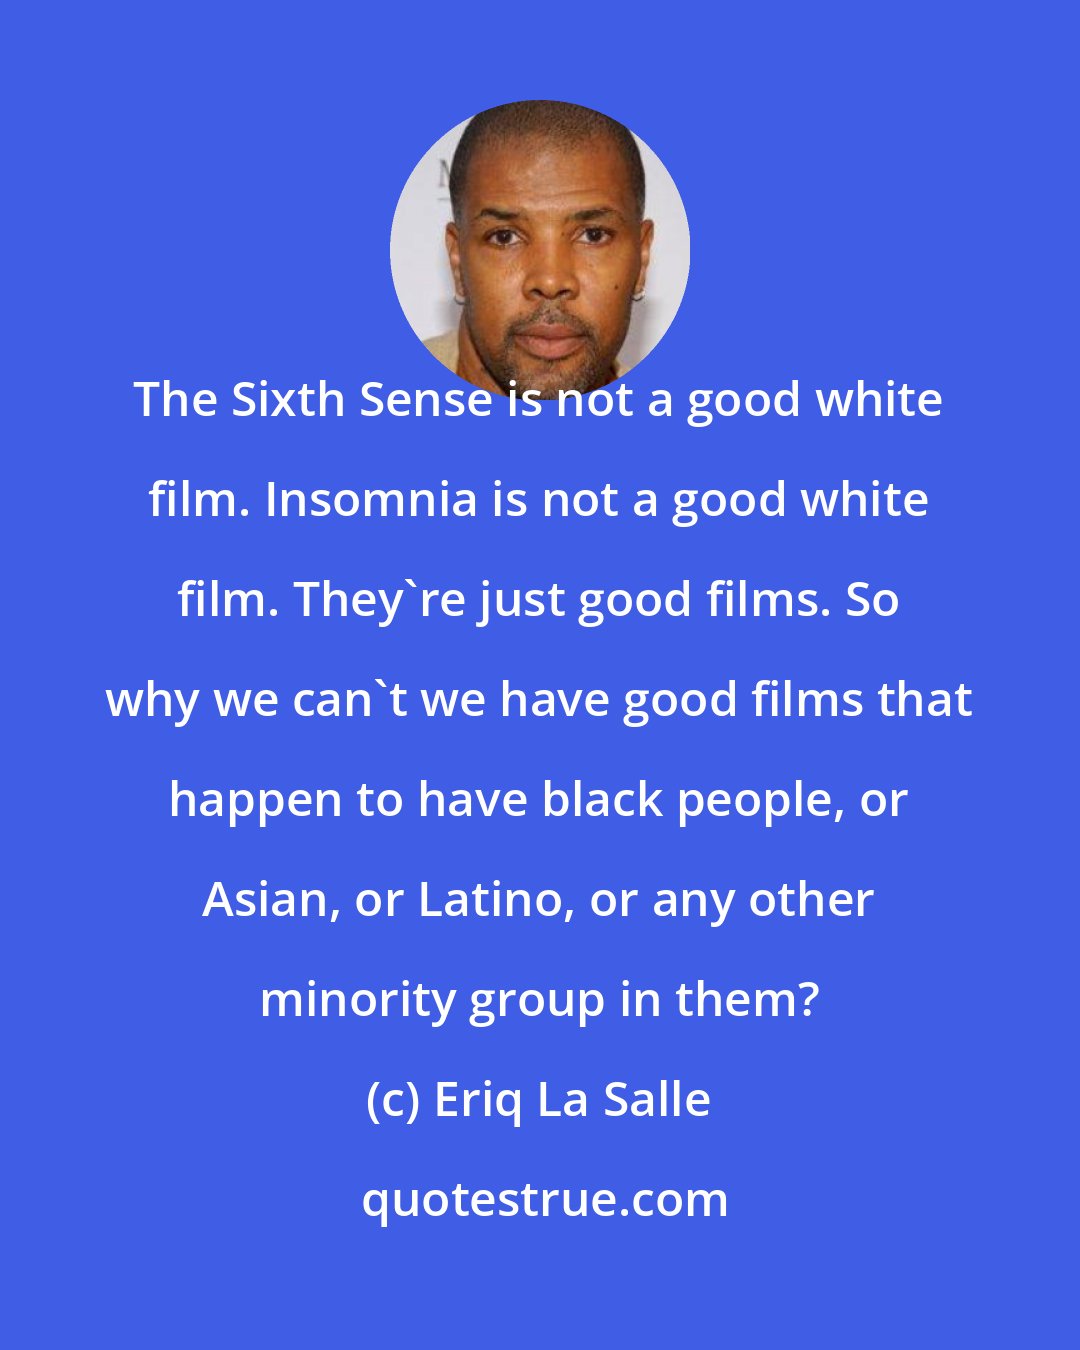 Eriq La Salle: The Sixth Sense is not a good white film. Insomnia is not a good white film. They're just good films. So why we can't we have good films that happen to have black people, or Asian, or Latino, or any other minority group in them?